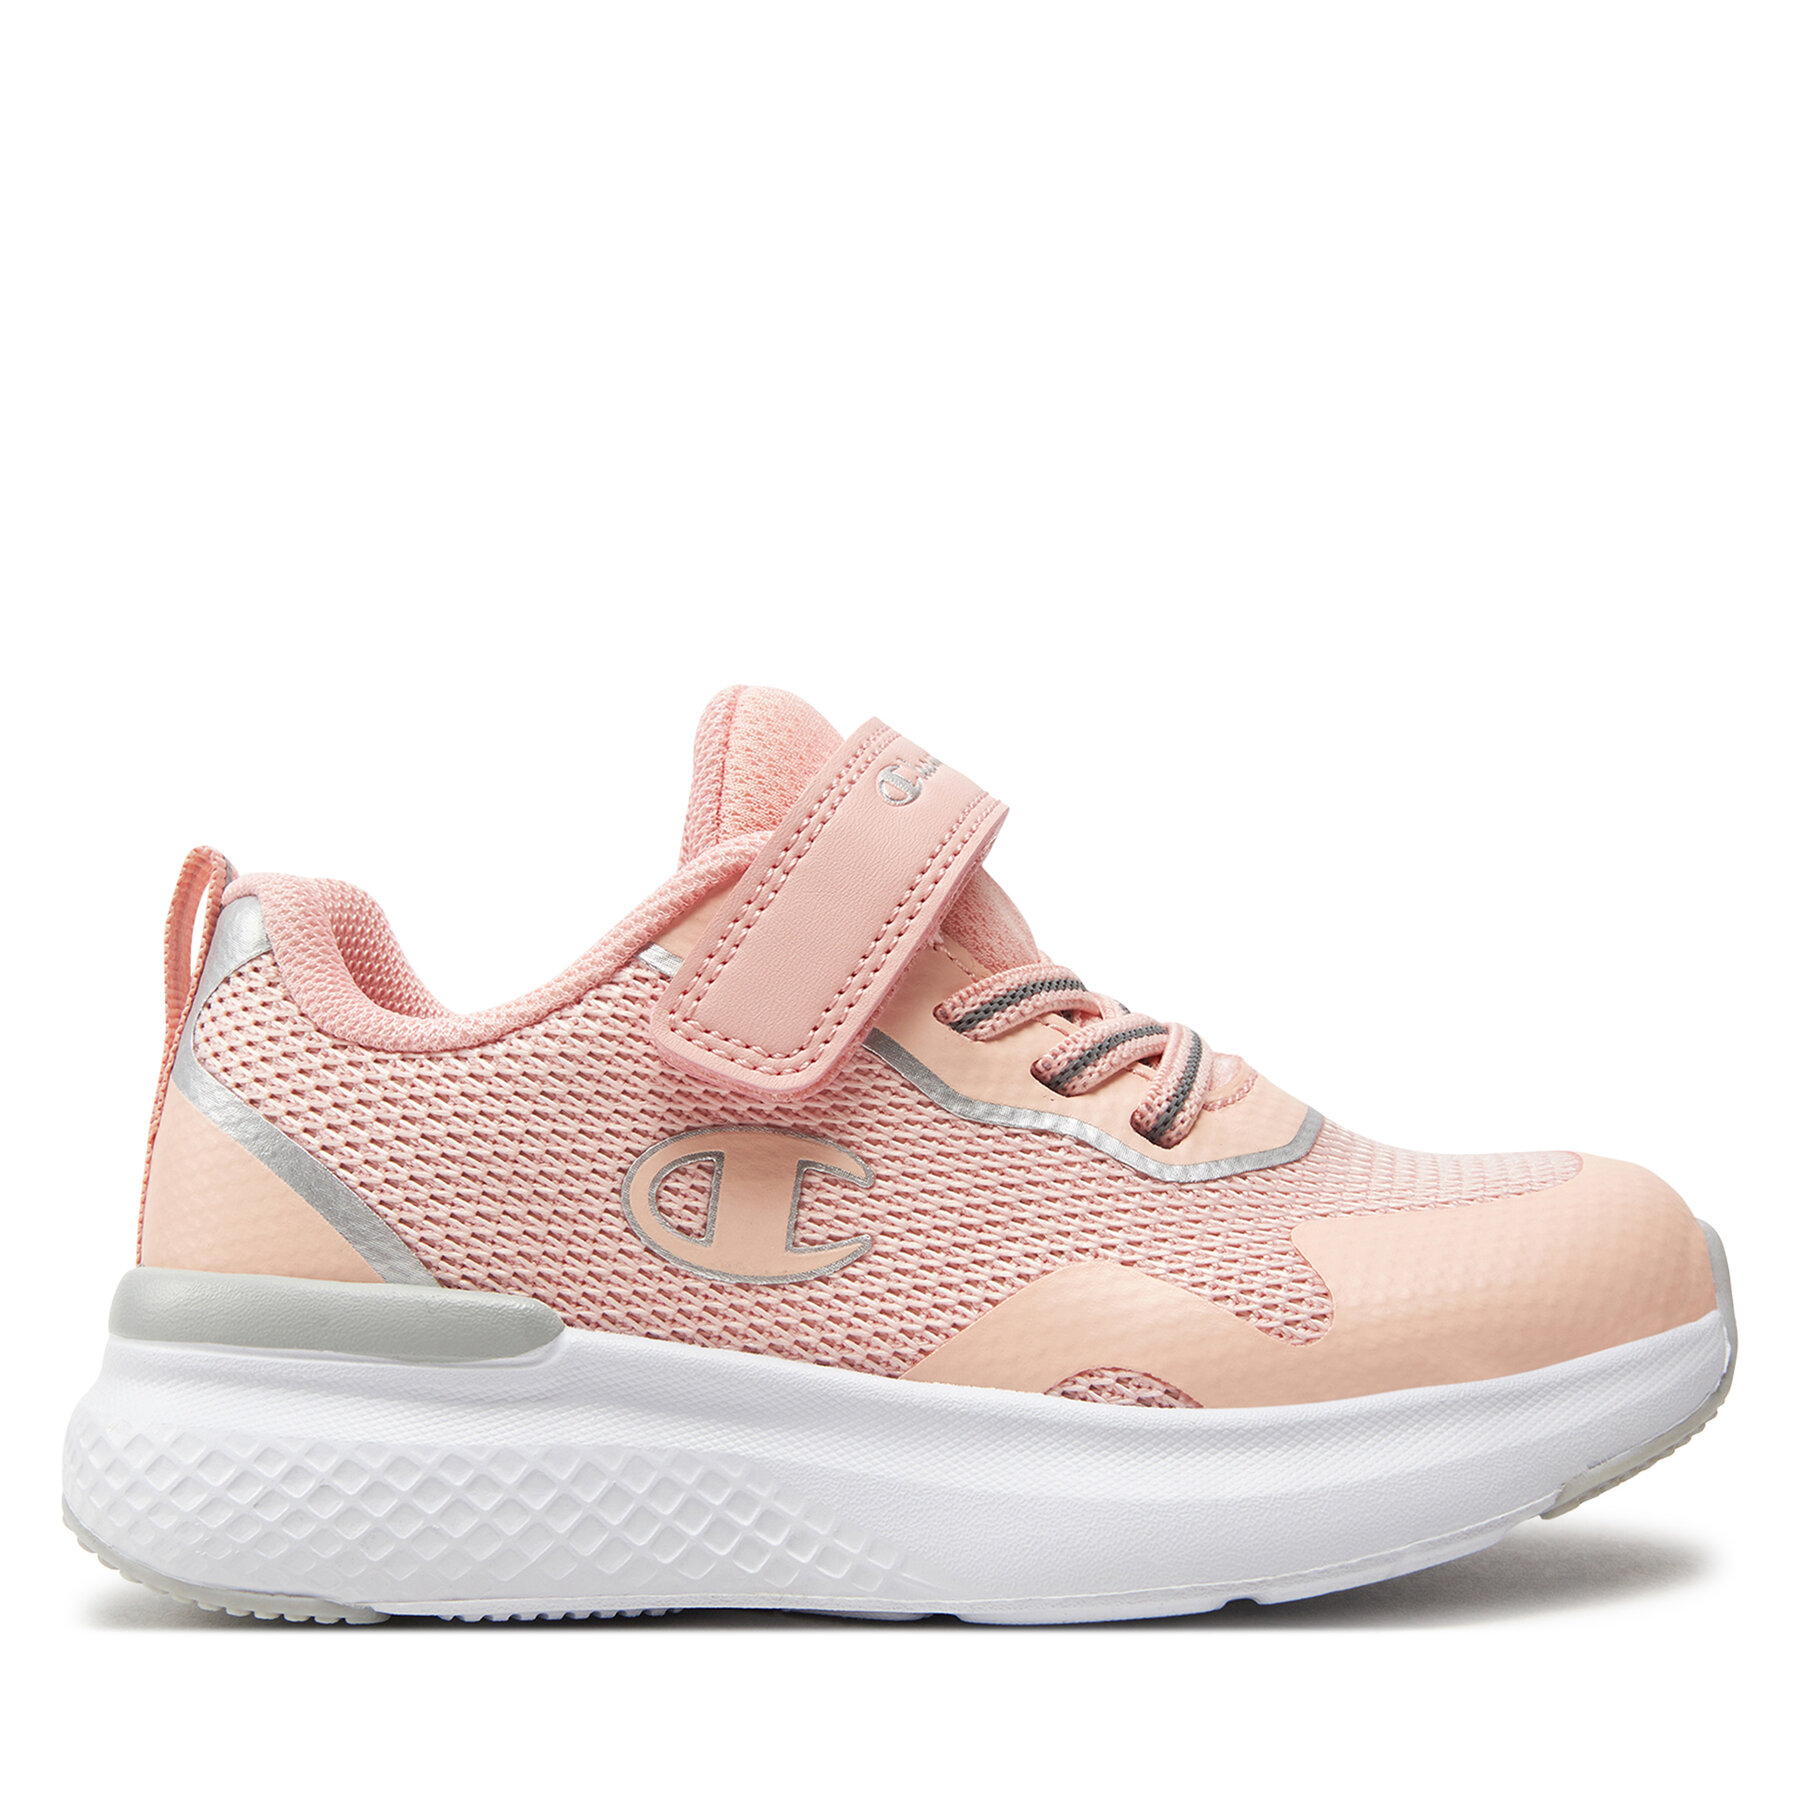 Sneakers Champion Bold 3 G Ps Low Cut Shoe S32833-CHA-PS127 Dusty Rose/Silver von Champion